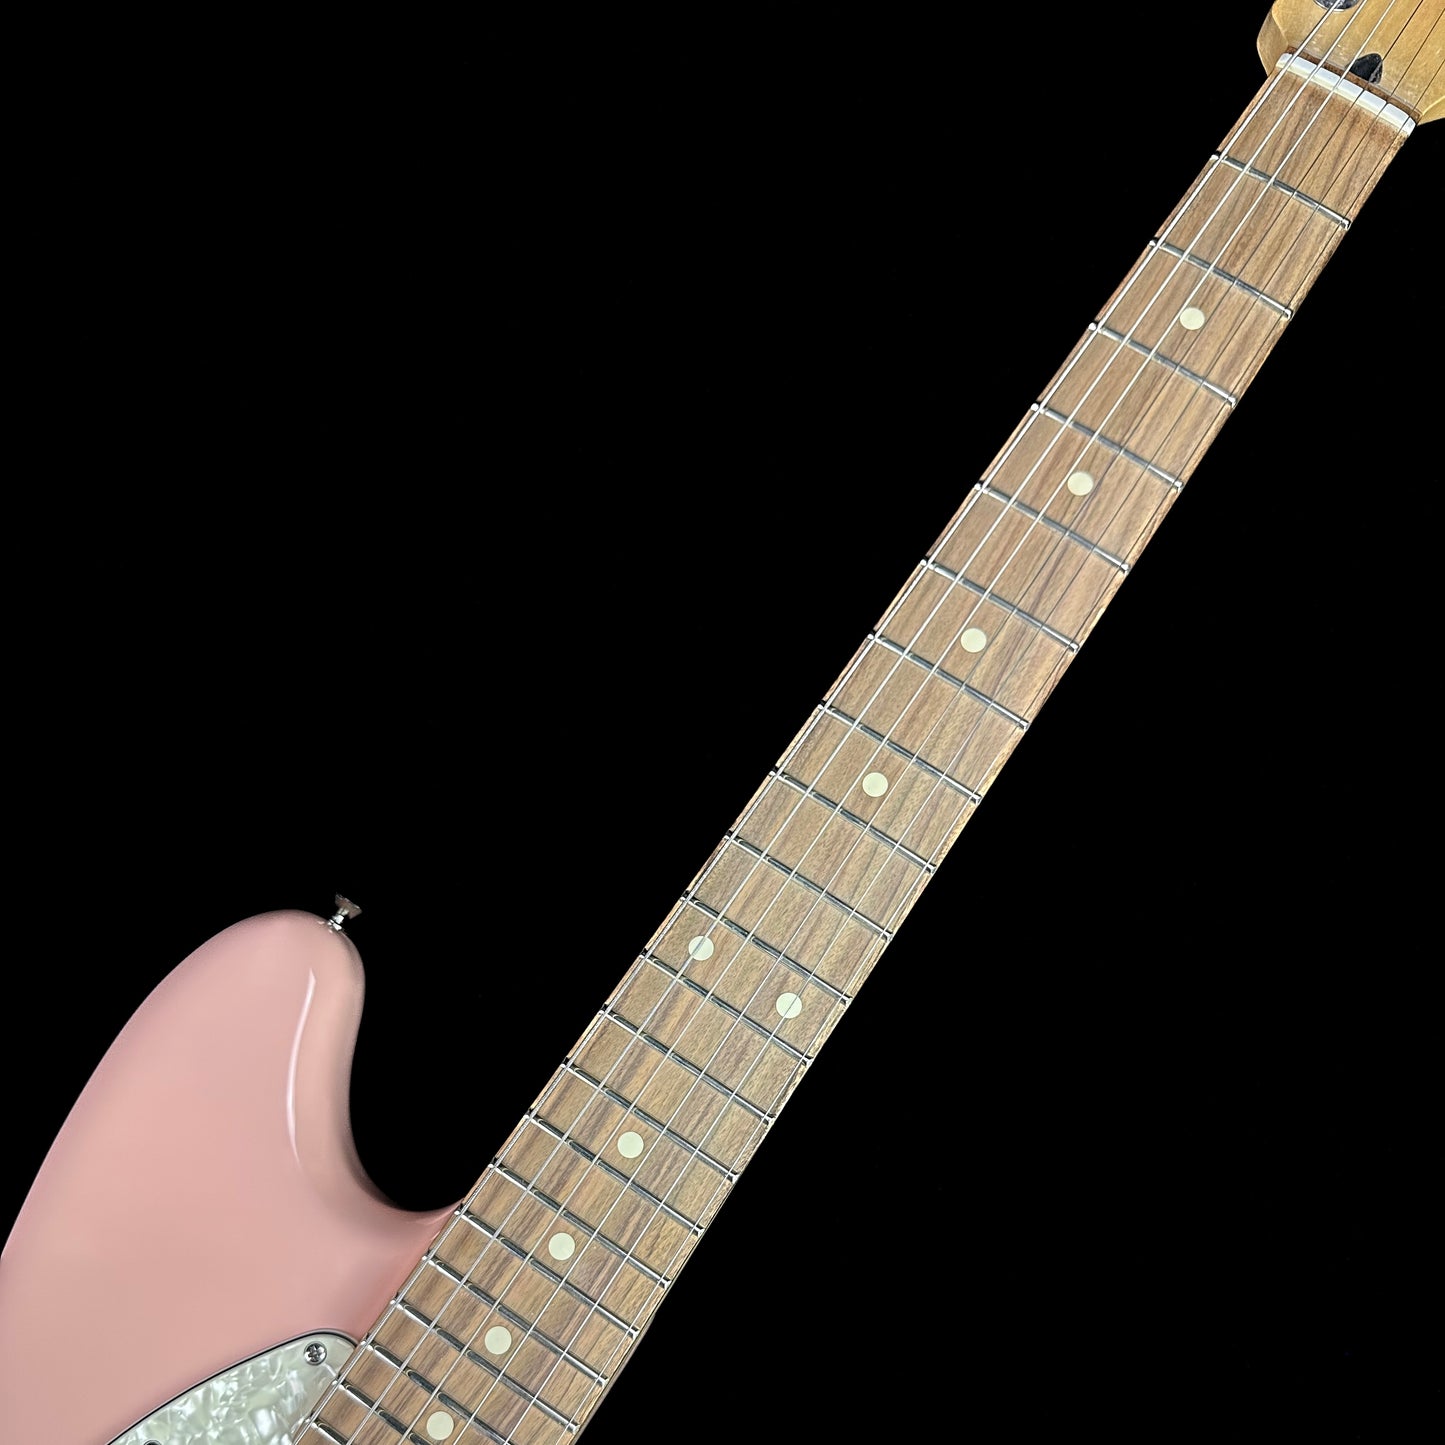 Neck of Used Fender Player Mustang Shell Pink.